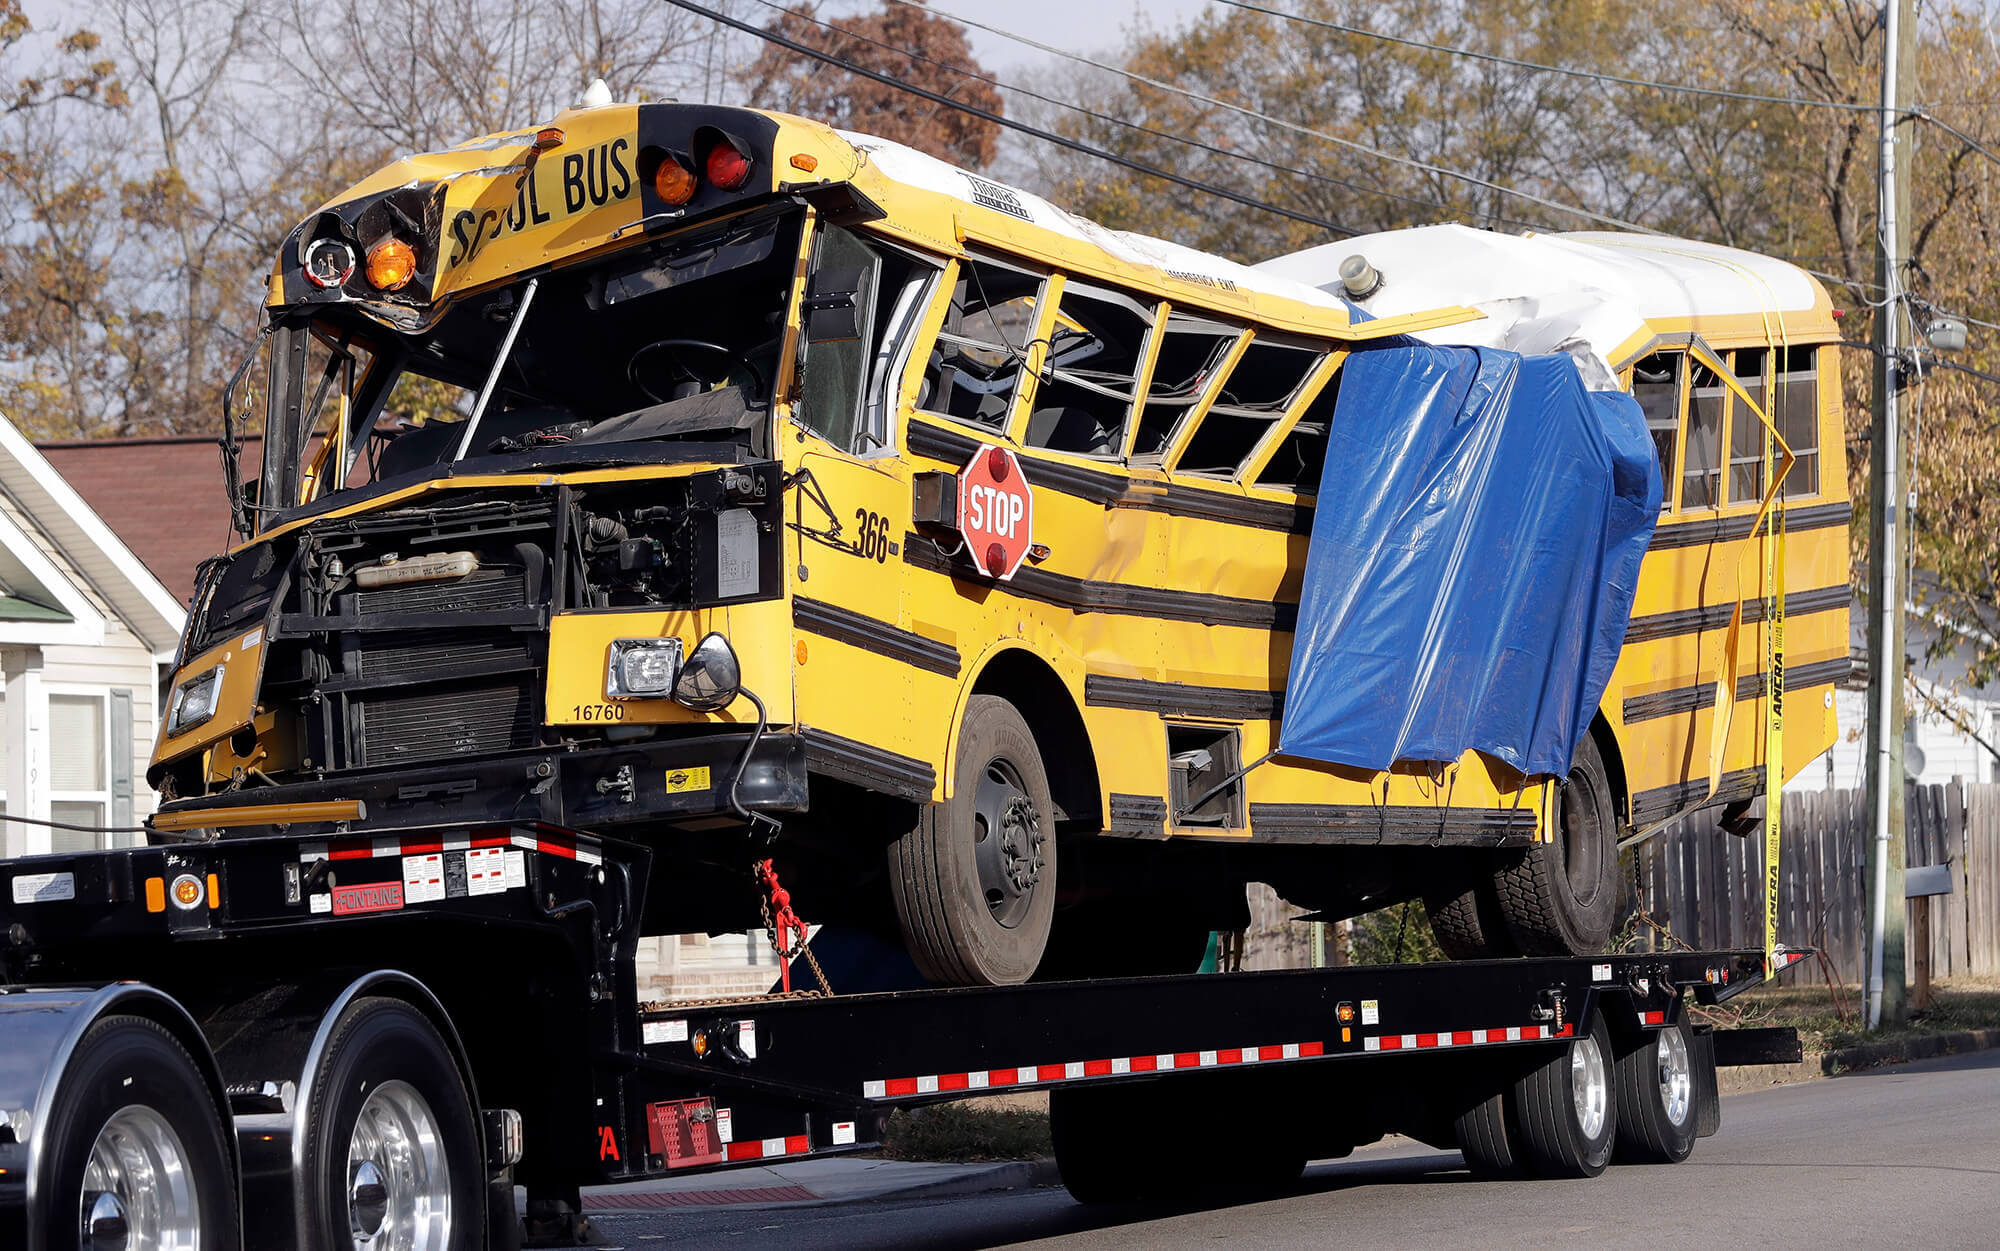 Image of school bus on tow truck